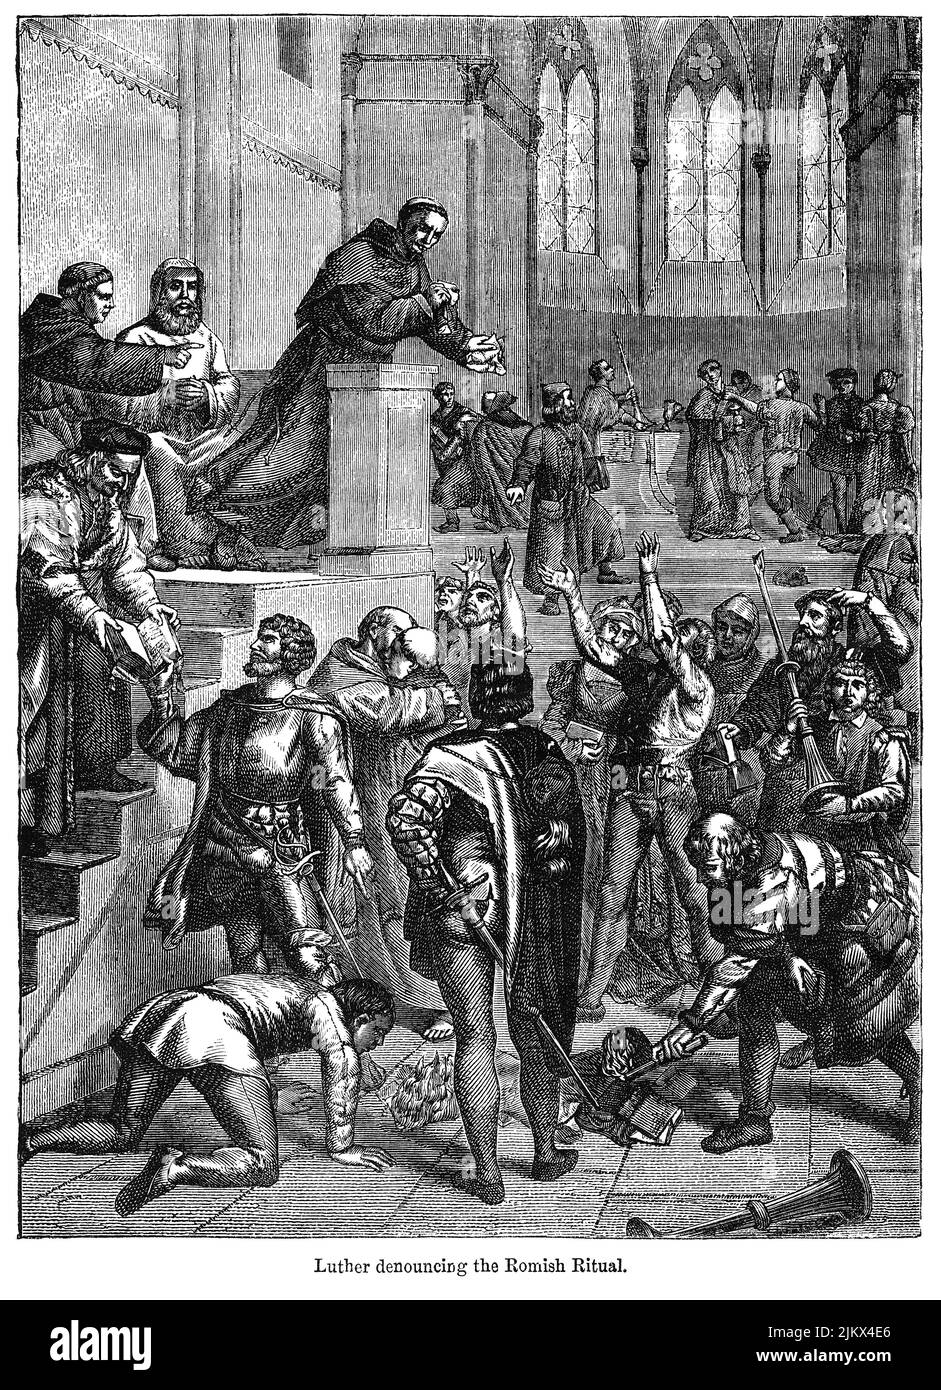 Luther denouncing the Romish Ritual, Illustration from the Book, 'John Cassel’s Illustrated History of England, Volume II', text by William Howitt, Cassell, Petter, and Galpin, London, 1858 Stock Photo